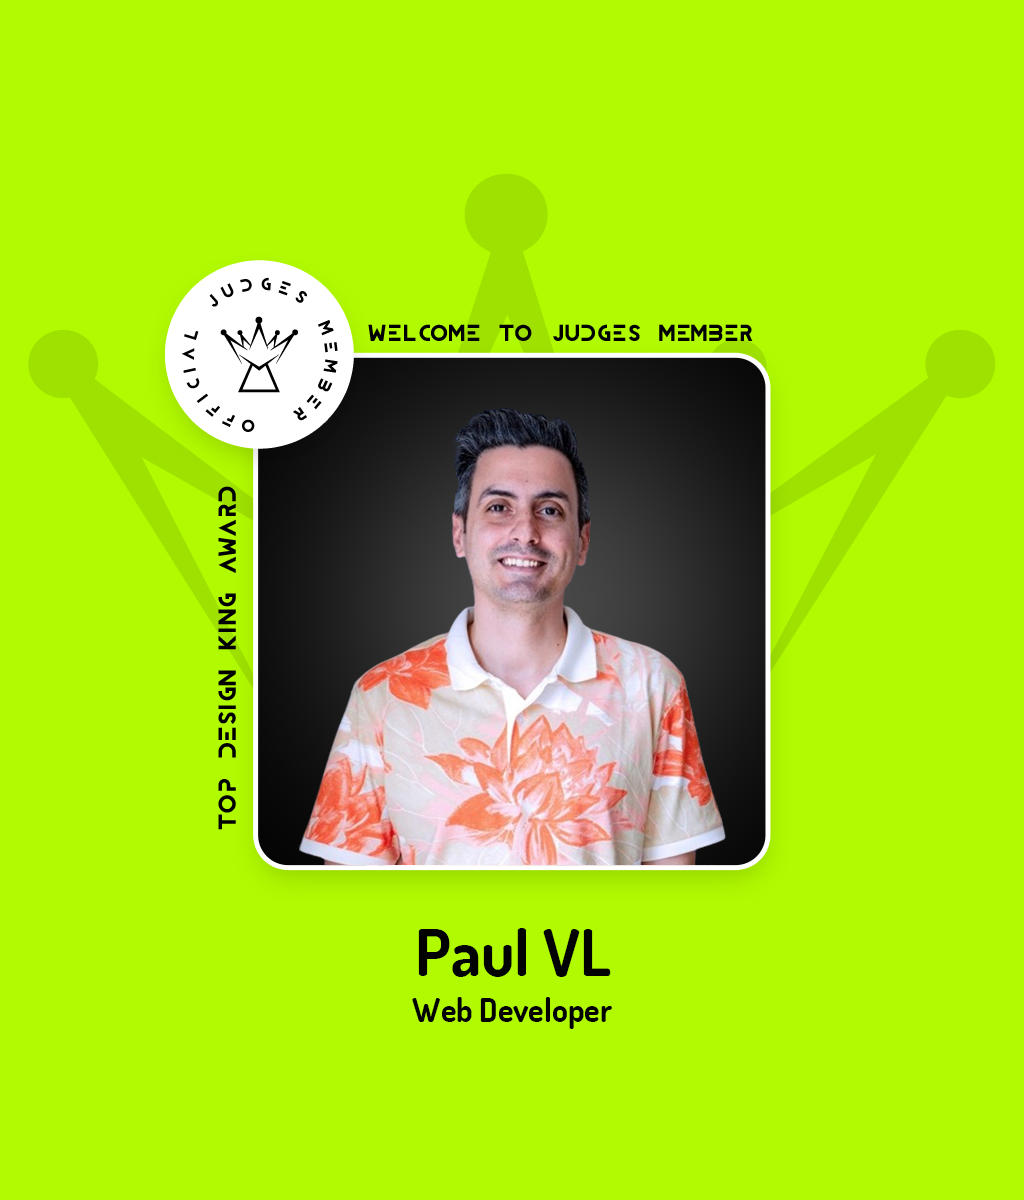 We're happy to share that Paul Vl, Web Developer has been selected as Top Design King Awards jury. We admire you that you are the part of our group.
topdesignking.com/judges/170/pau…

#topdesignking #jury #judges #juryteam #awards #designaward #webdesign #designinspiration